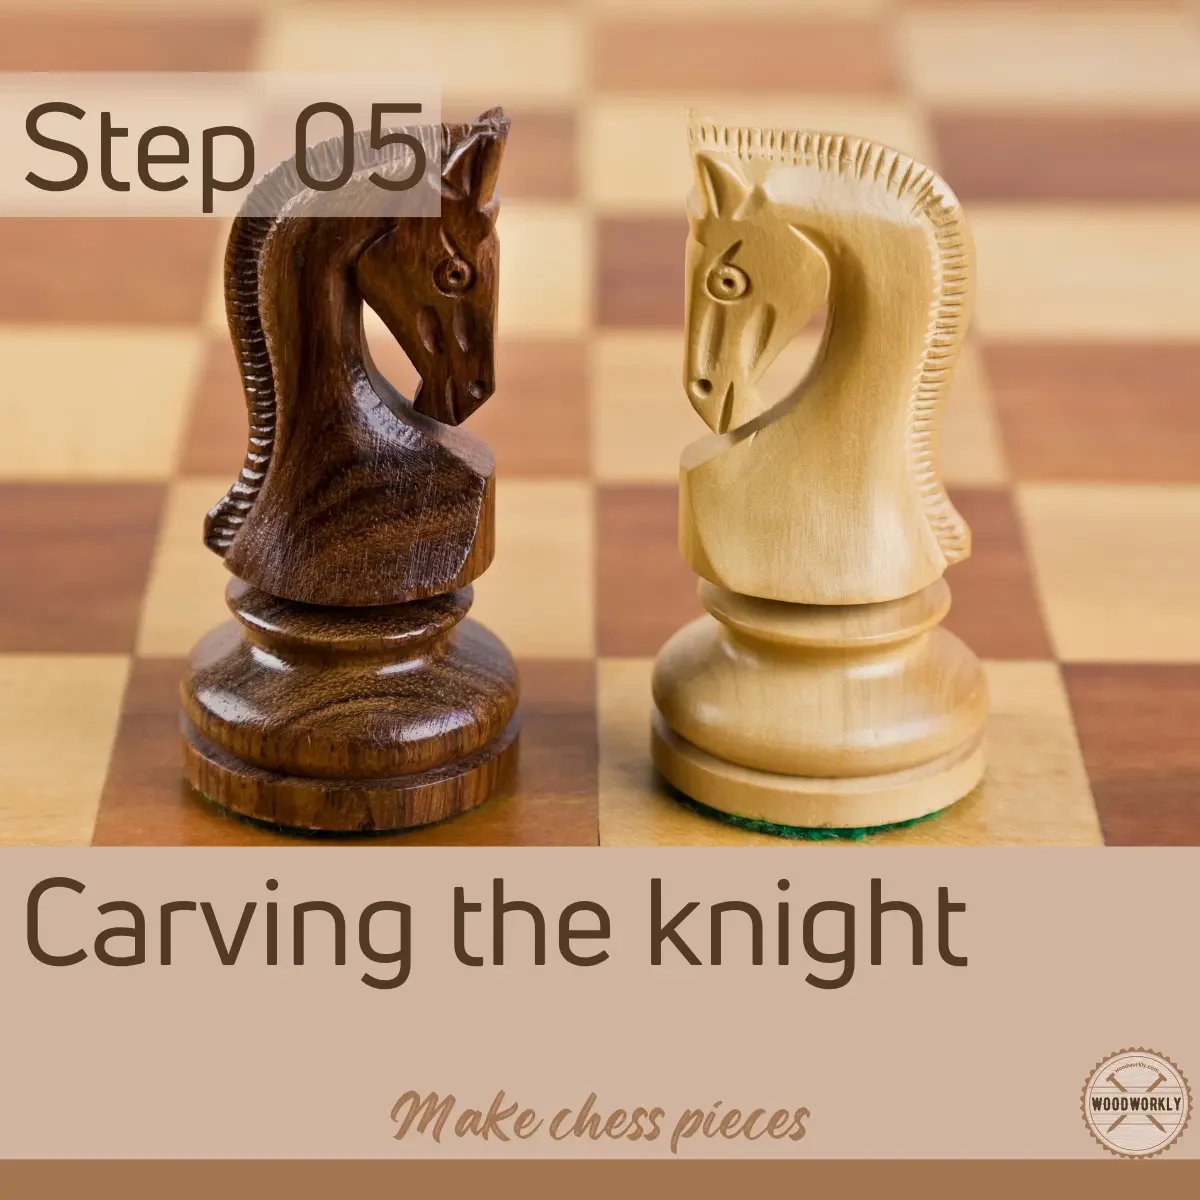 Carving the knight